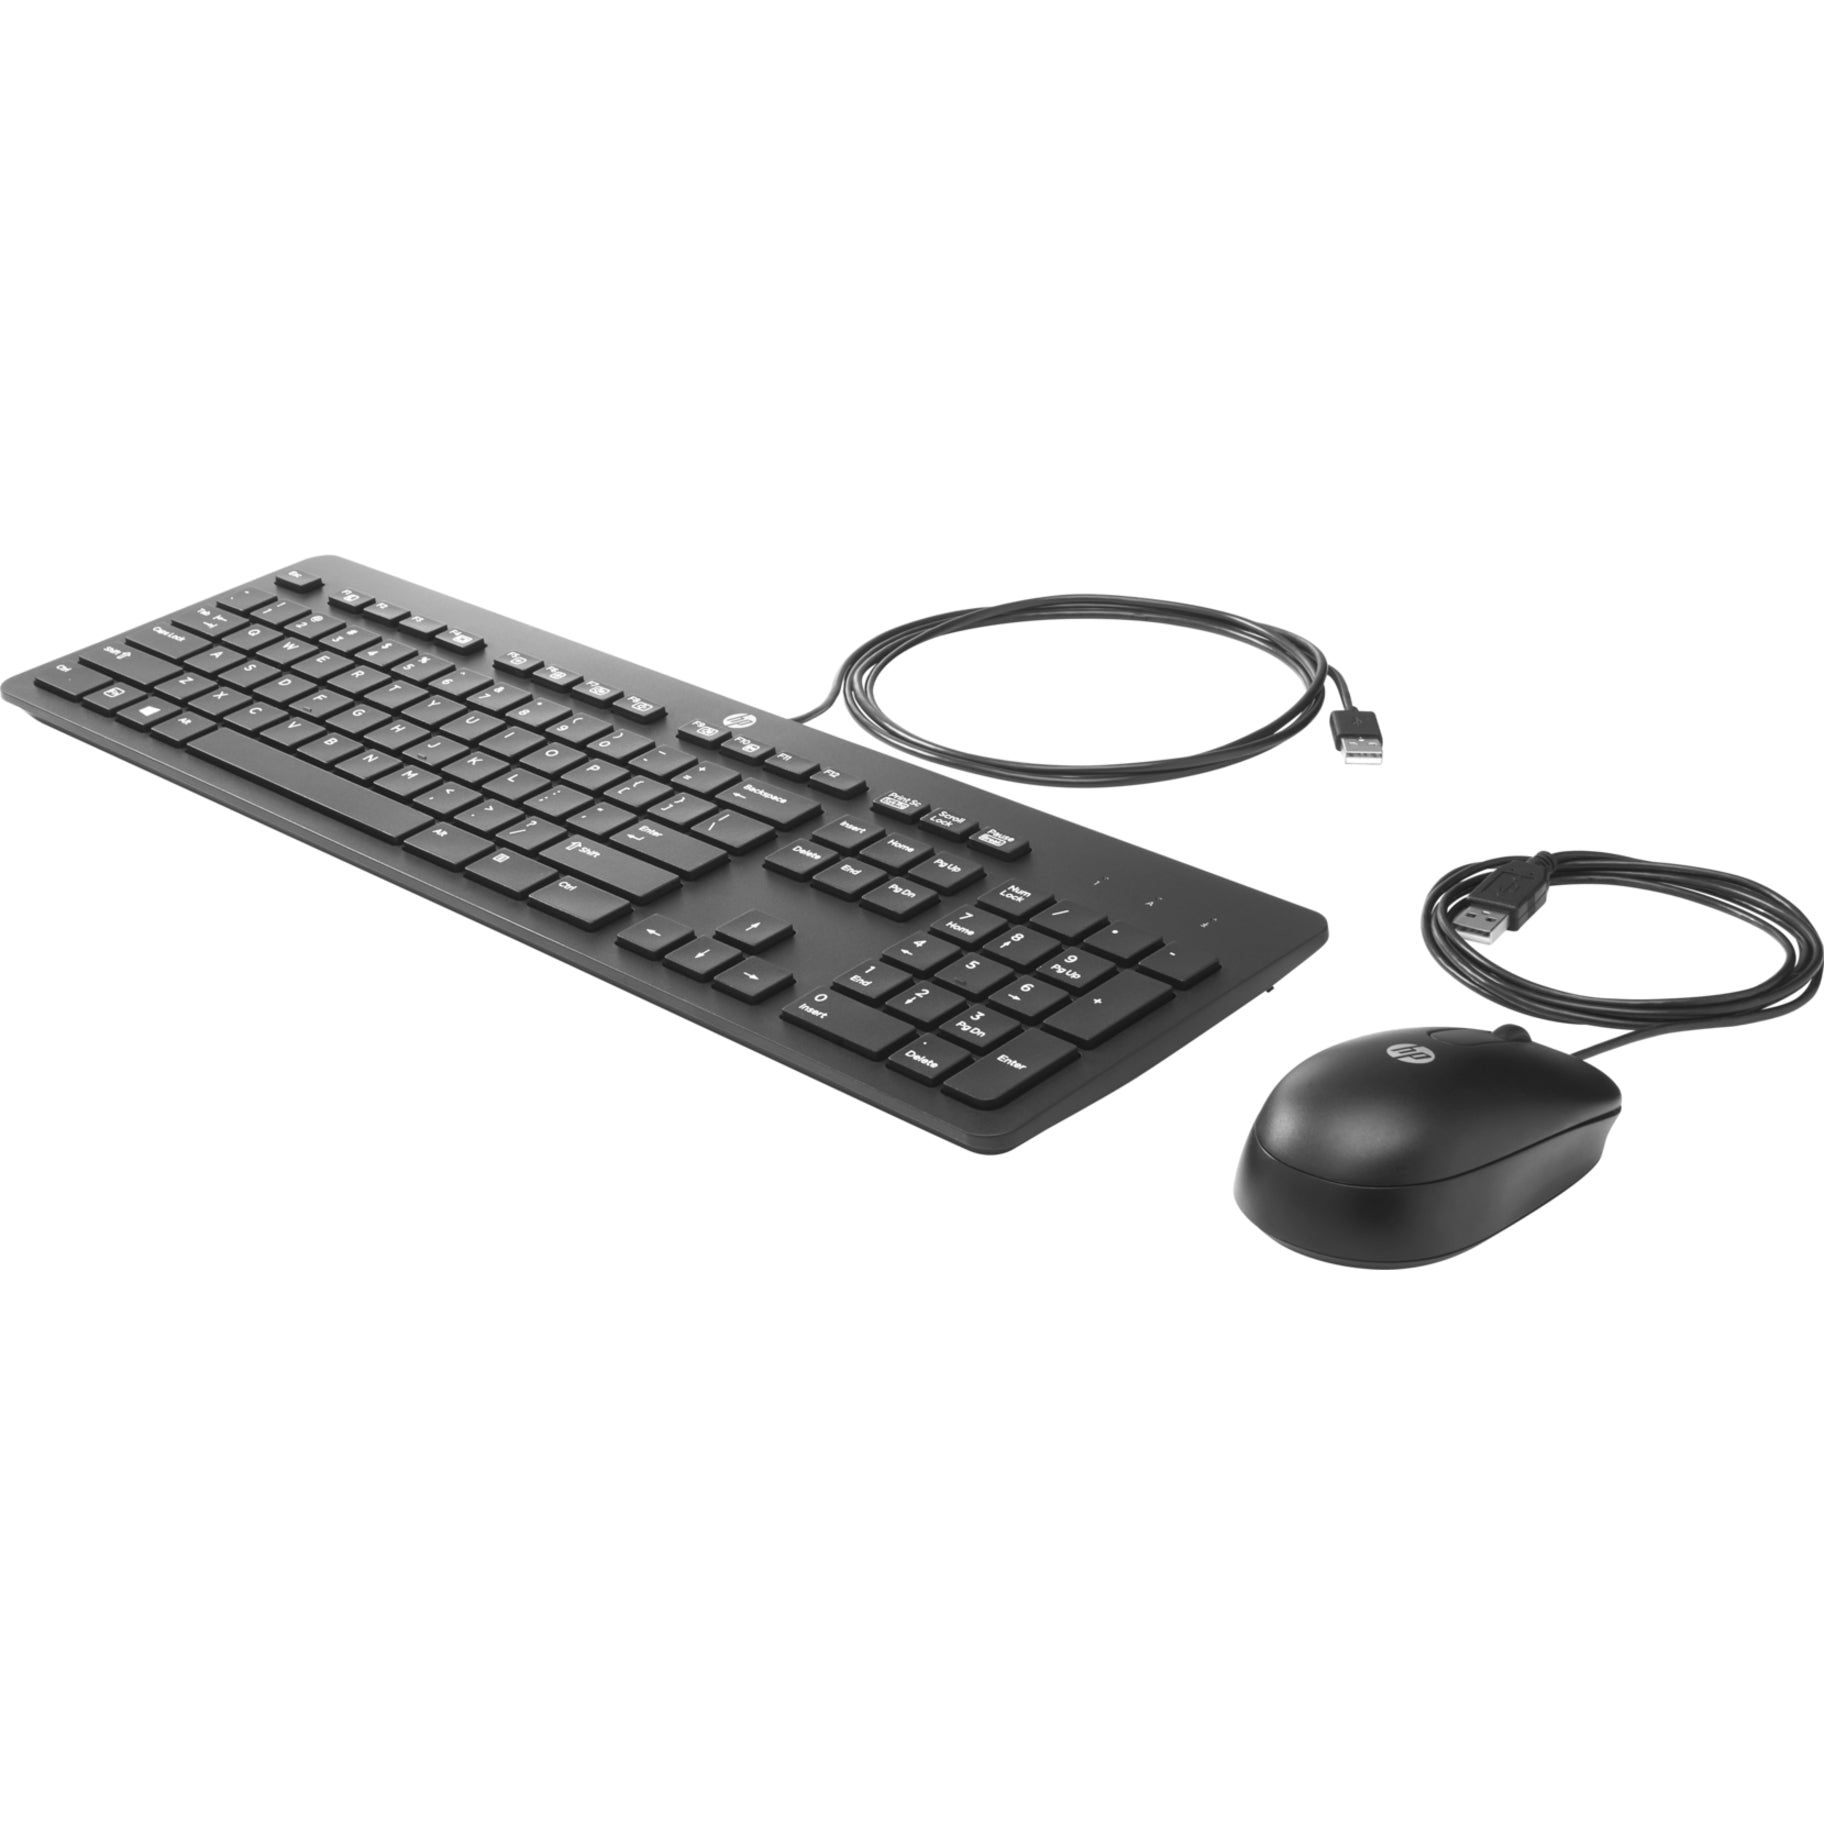 HP Keyboard & Mouse, USB Cable Connectivity, English (US) Localization